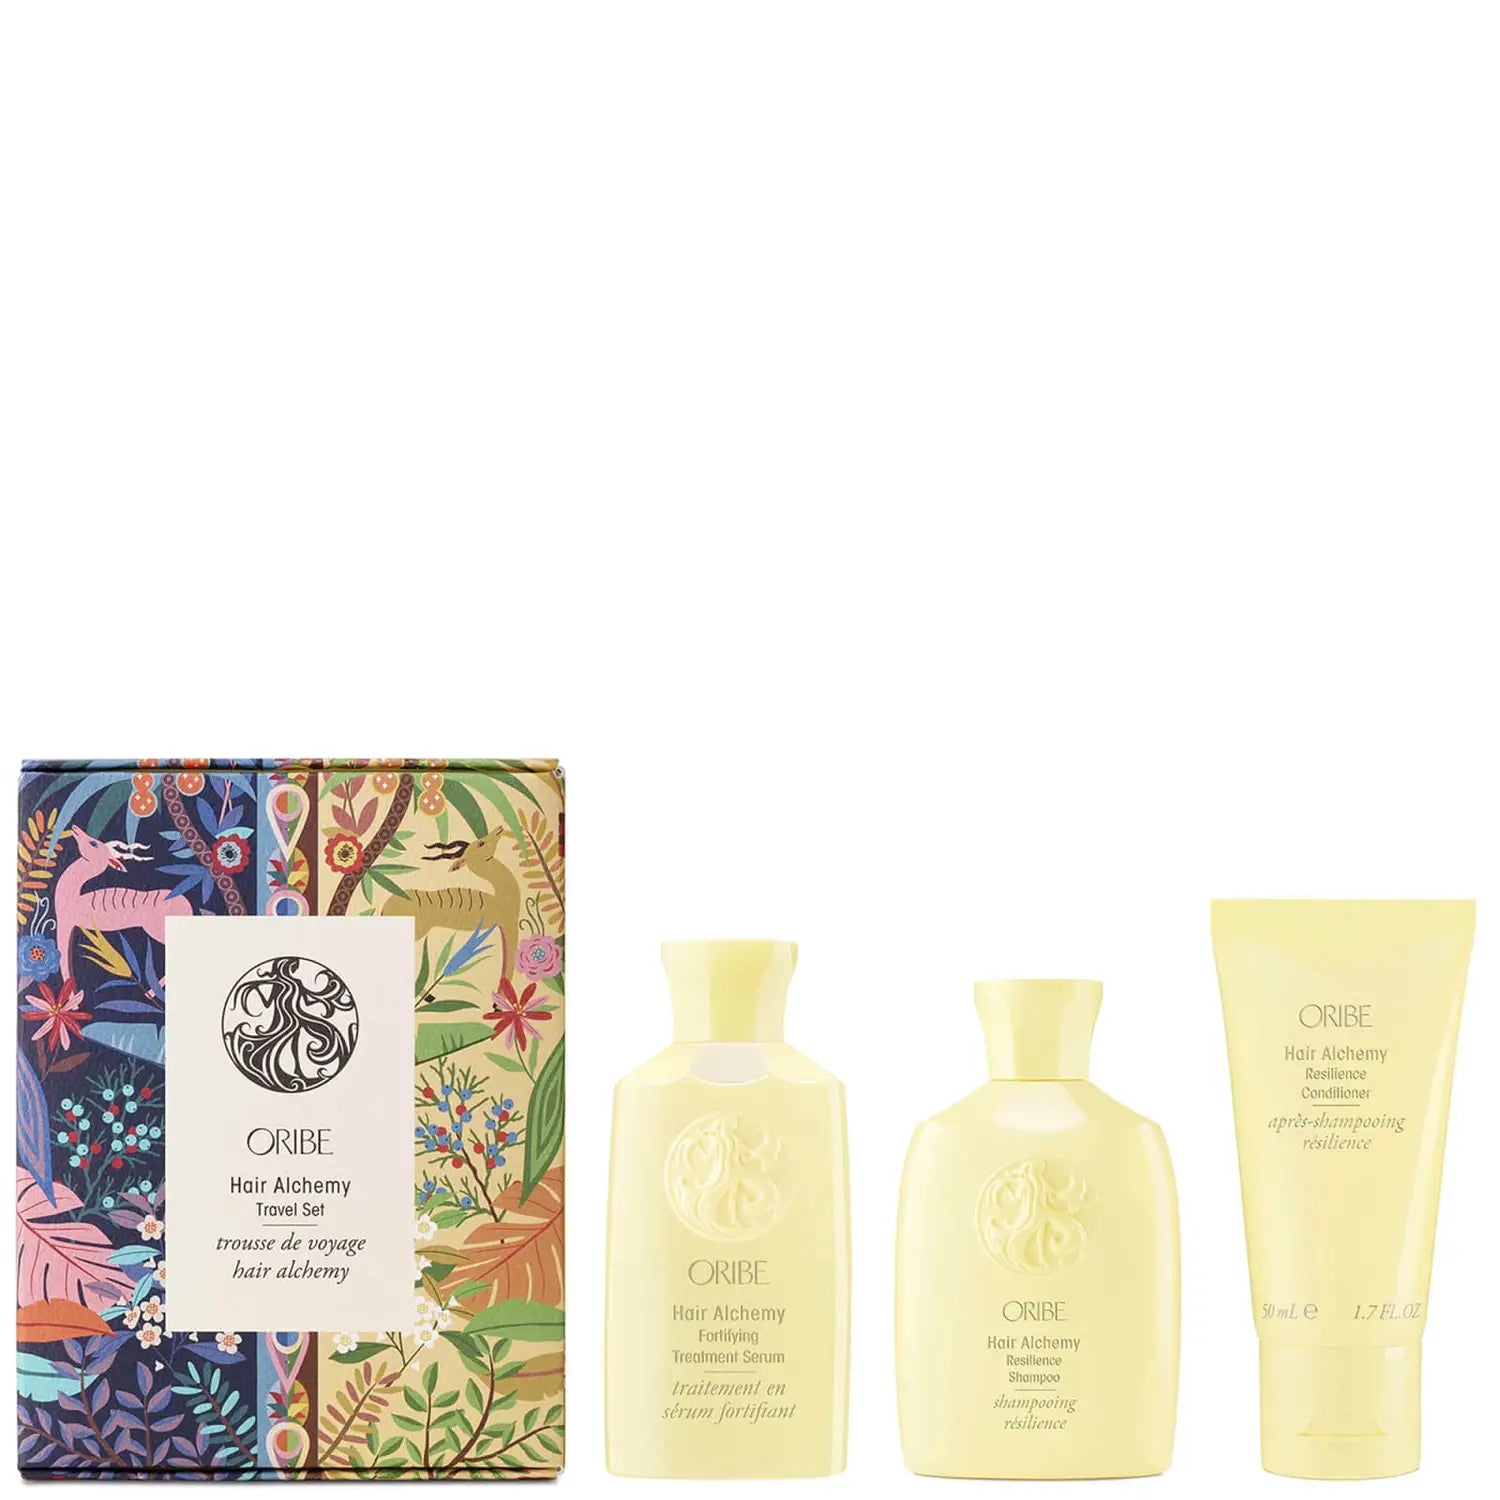 Oribe Hair Alchemy Collection Travel Set - $73 Value